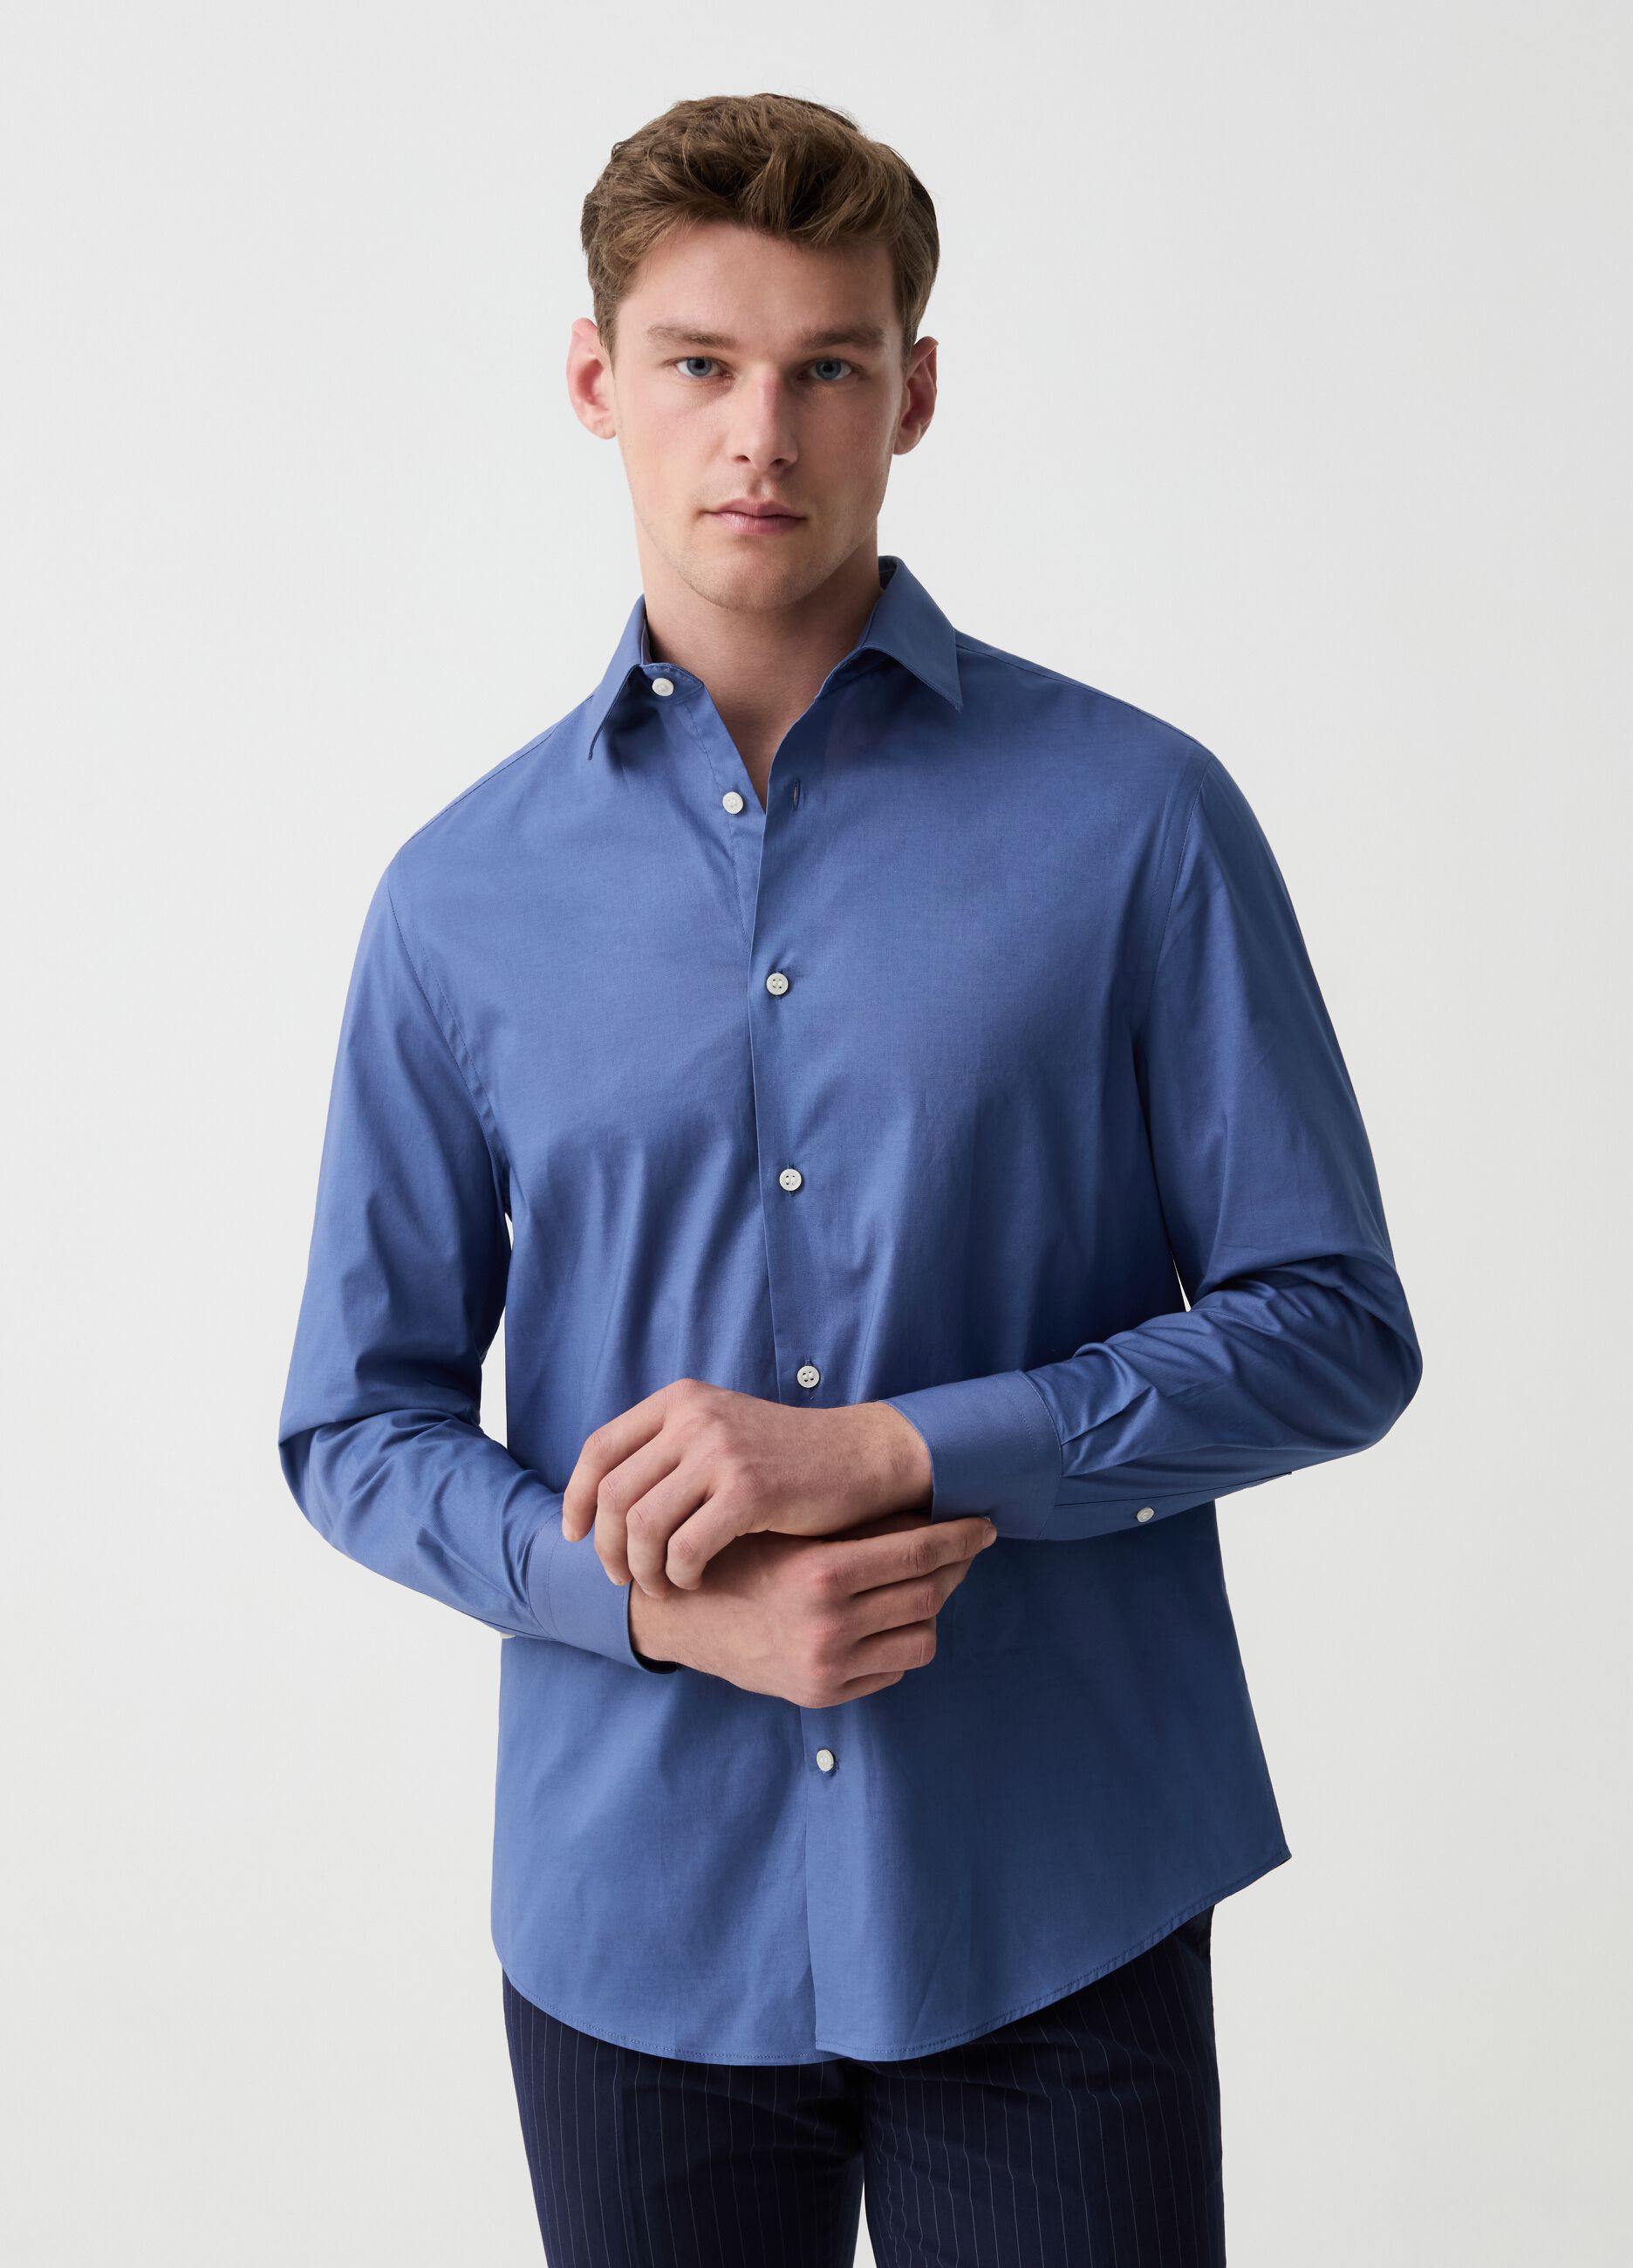 Regular-fit shirt in stretch cotton